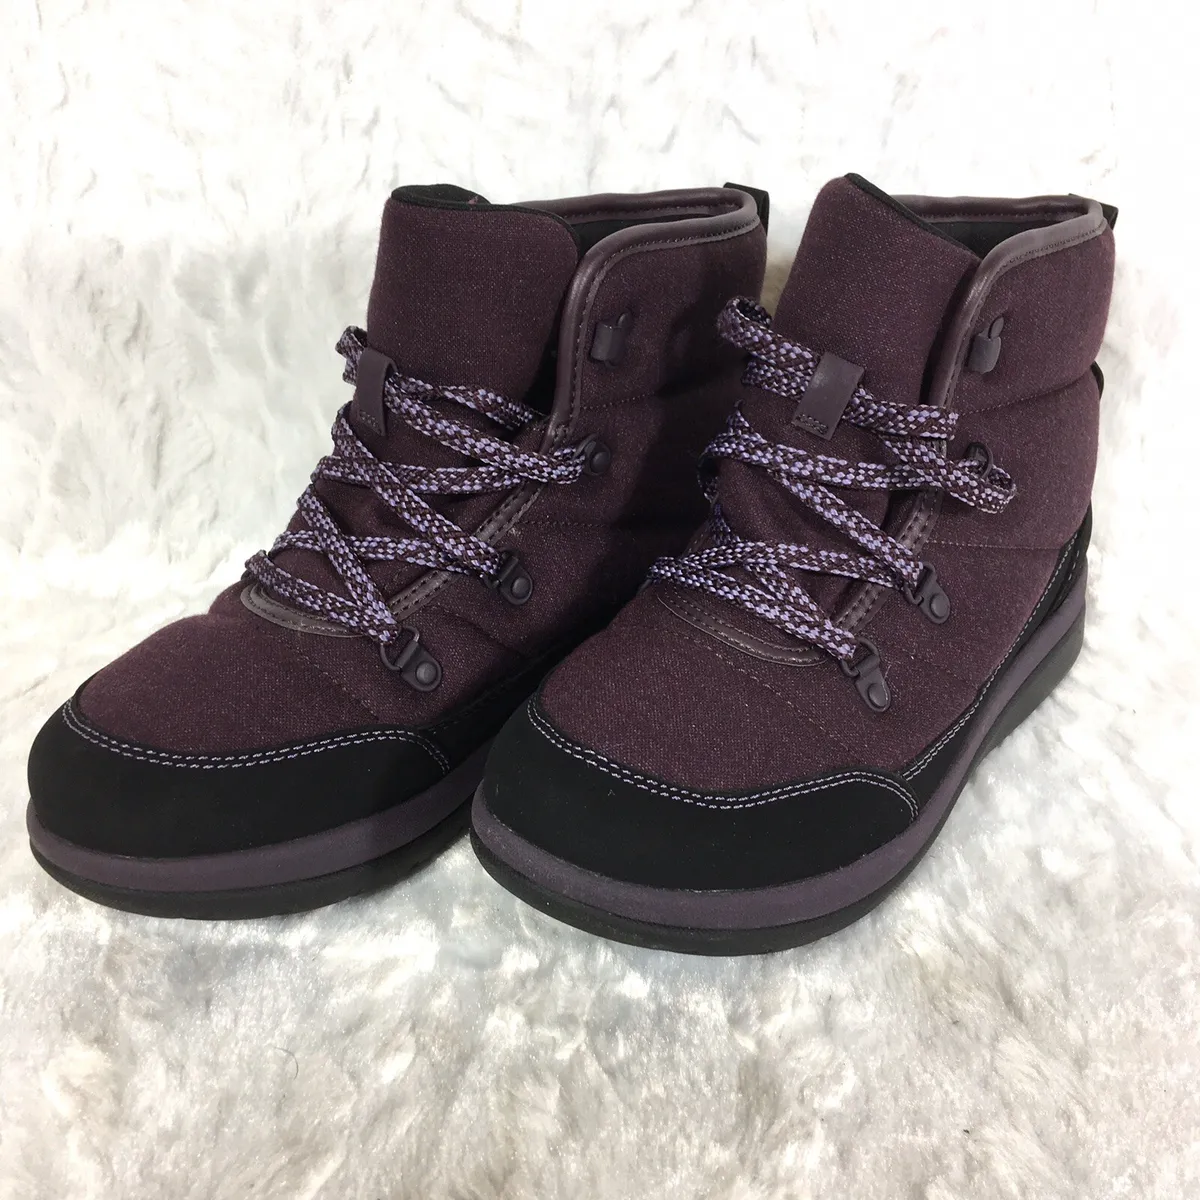 New! Cloudsteppers Clarks Lace-up Boots Cabrini Cove Aubergine Purple $120 | eBay